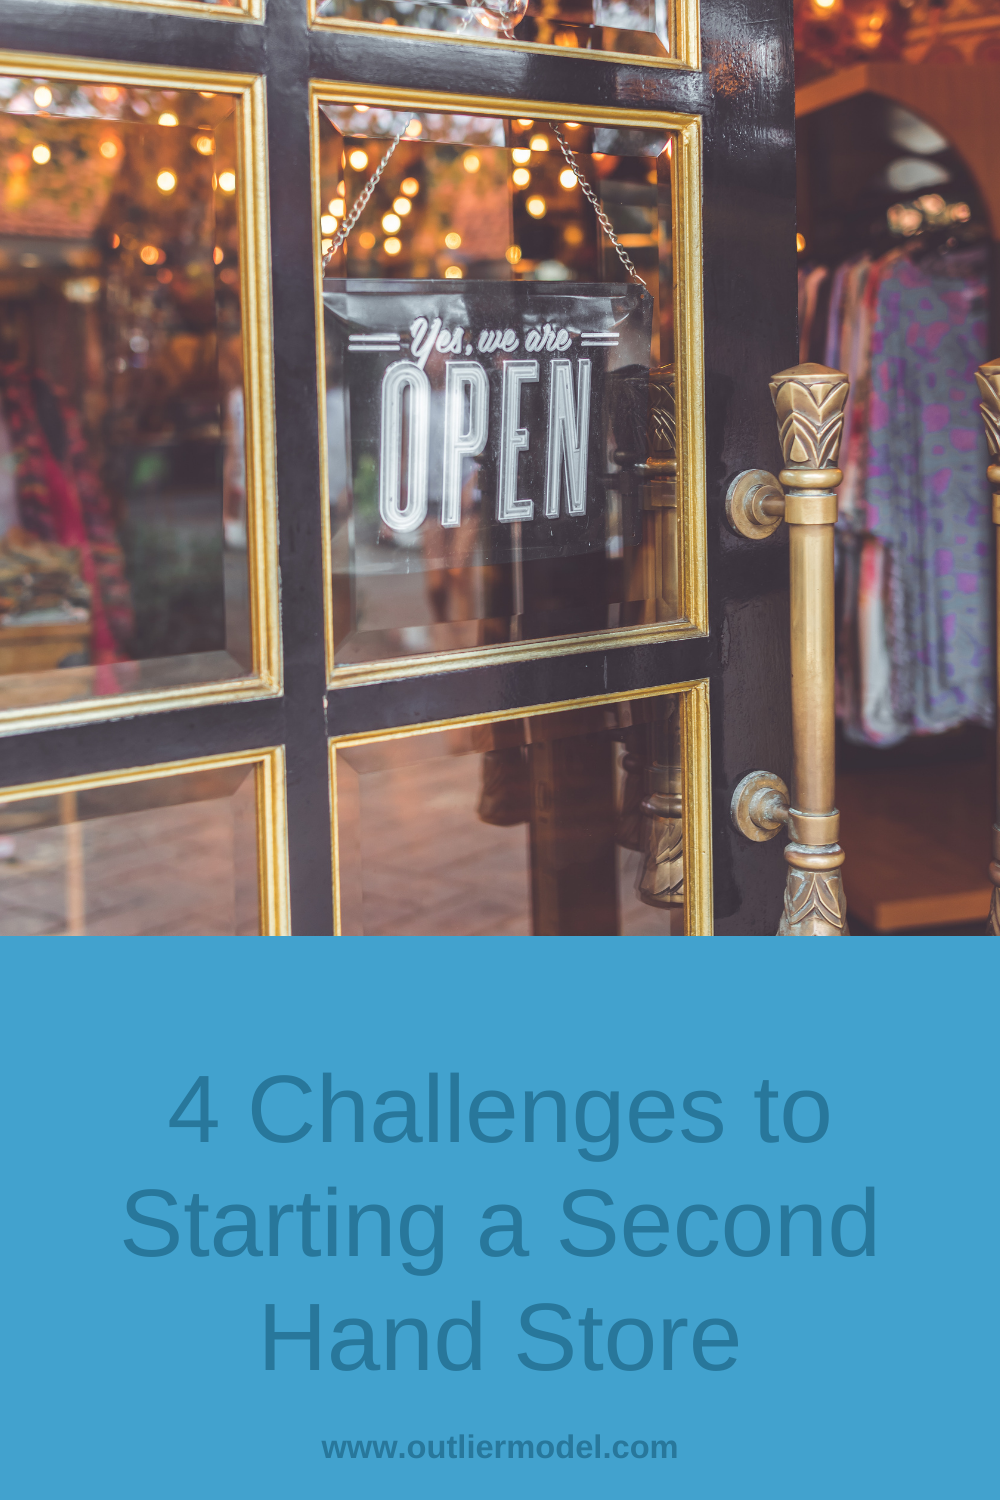 4 Challenges to Starting a Second Hand Store